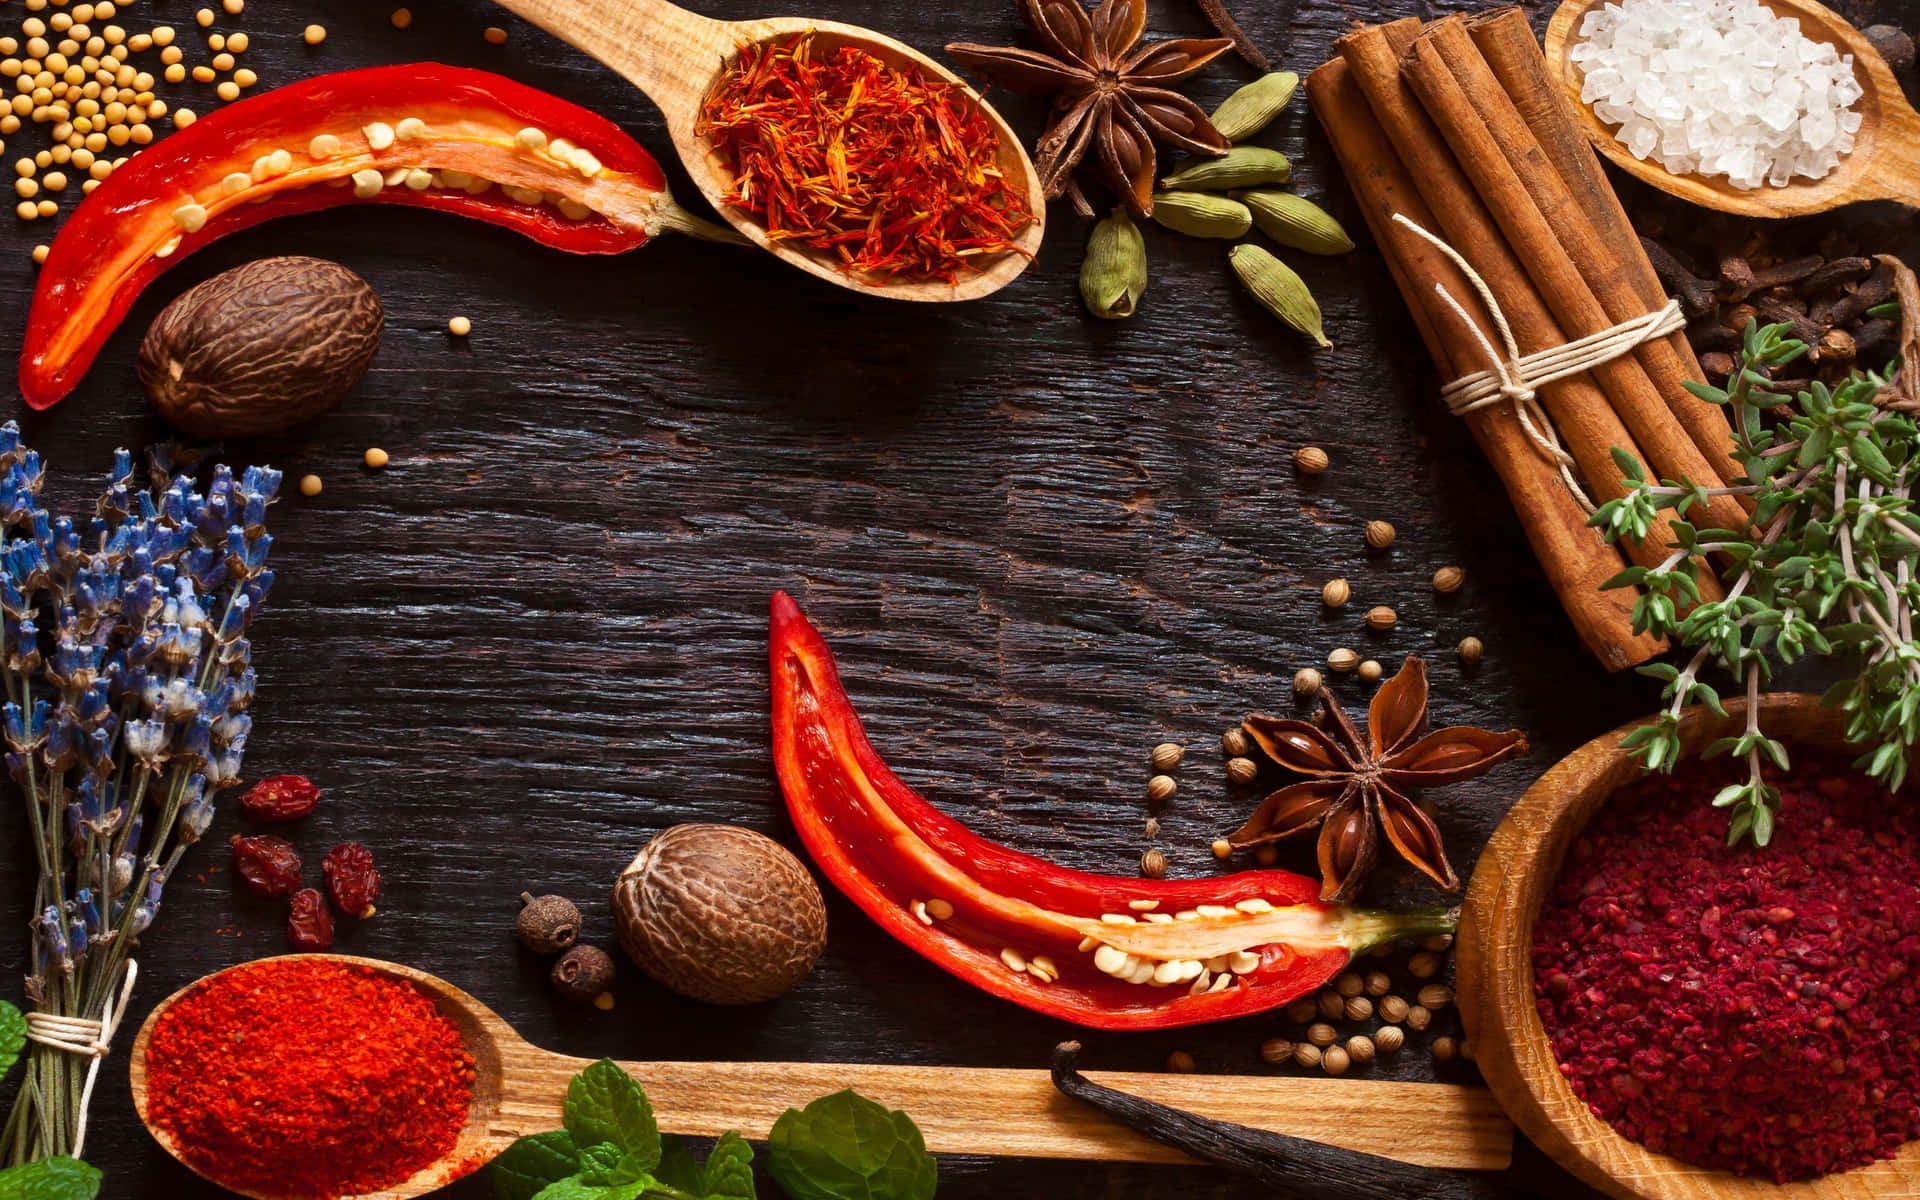 Vibrant multi-colored spices to add flavor to your favorite dishes